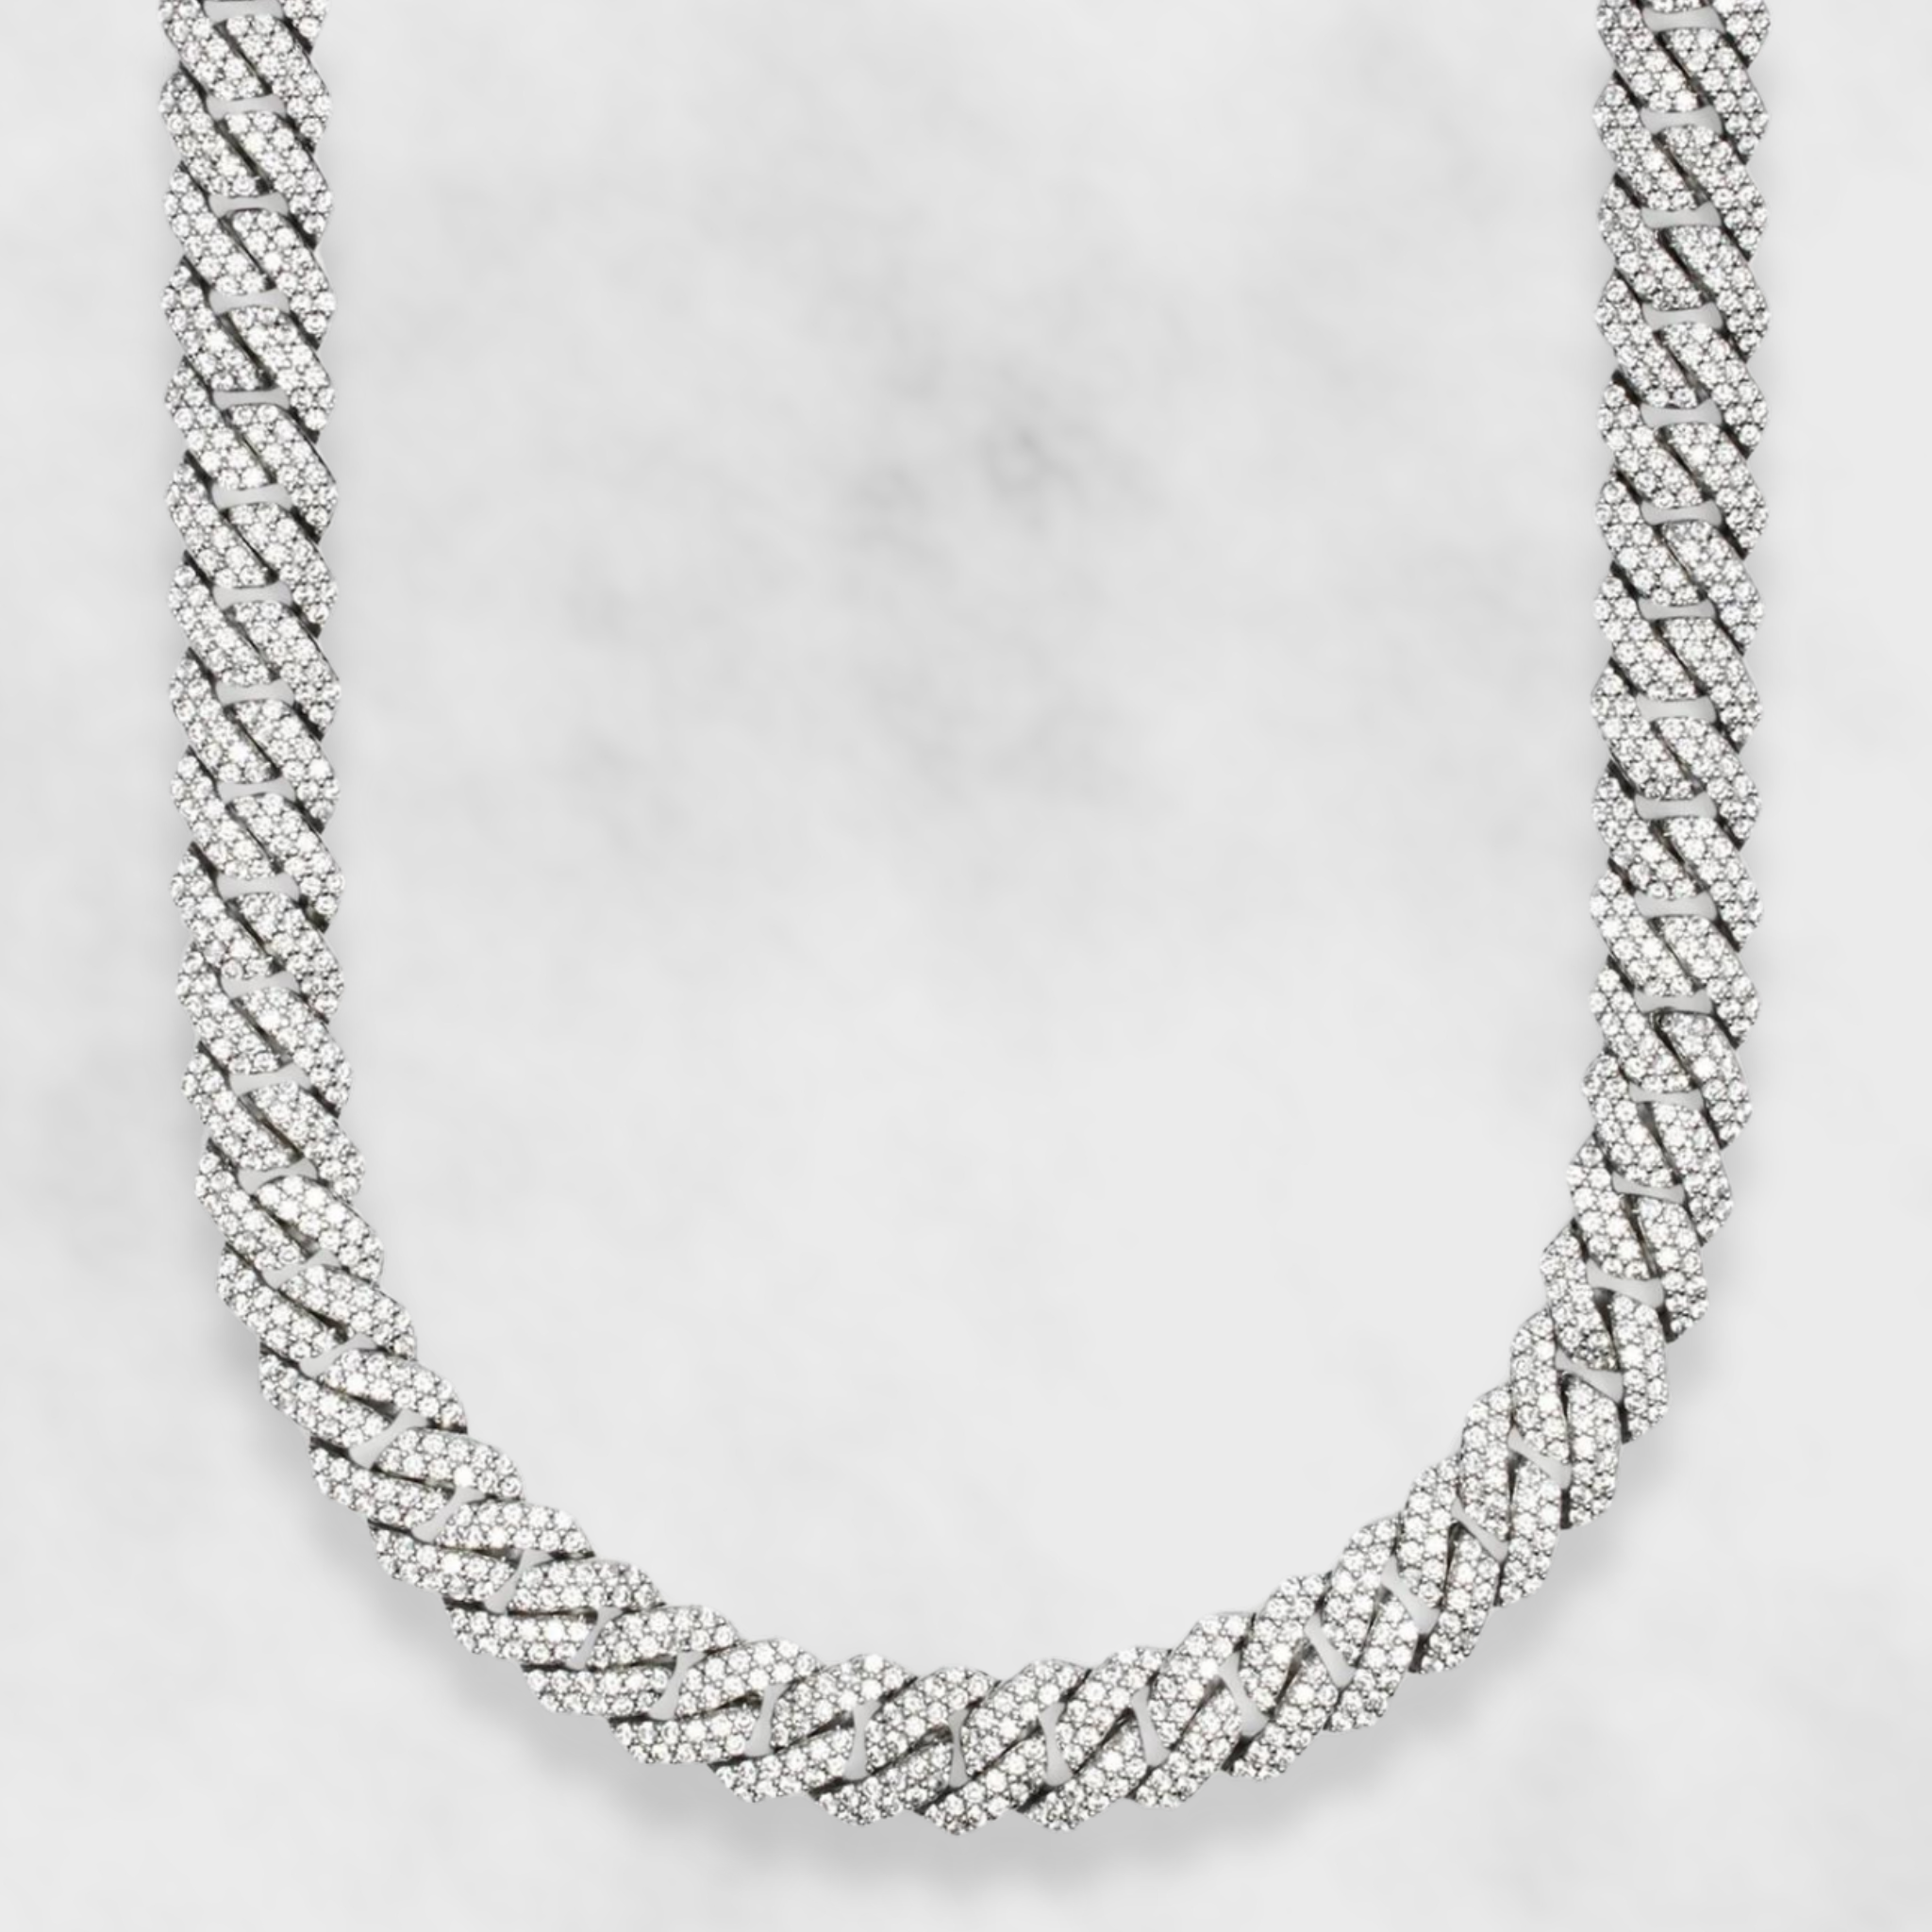 15mm Diamond Prong Link Chain - White Gold